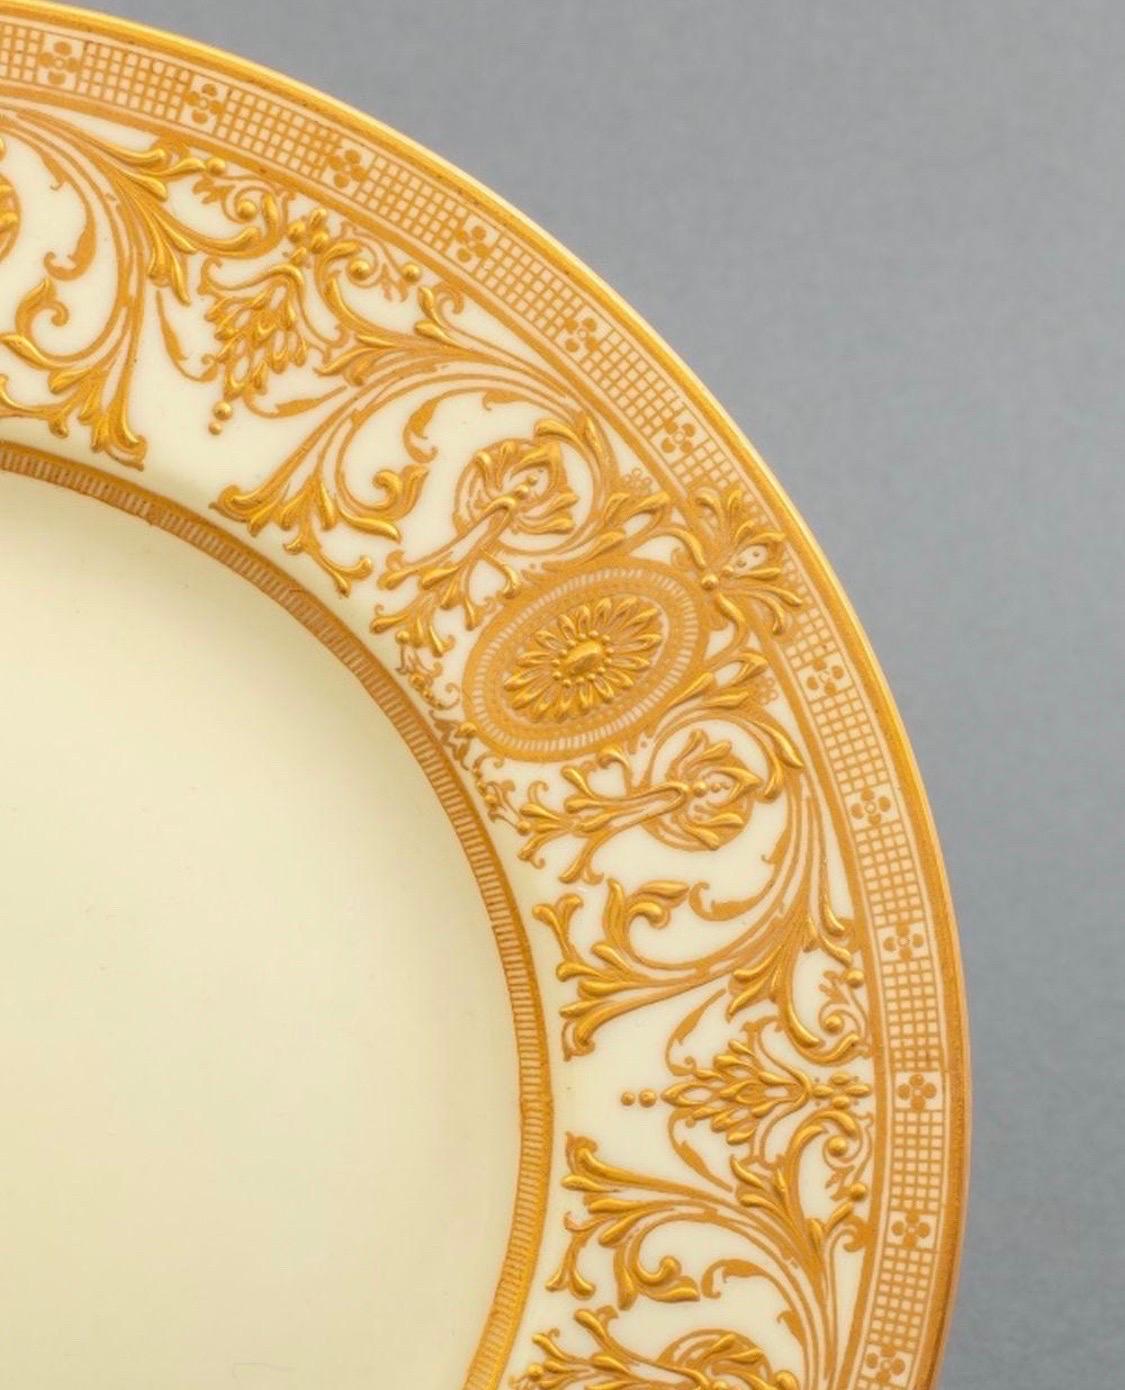 Gilt 12 Gold Encrusted Tiffany Plates by Royal Worchester For Sale